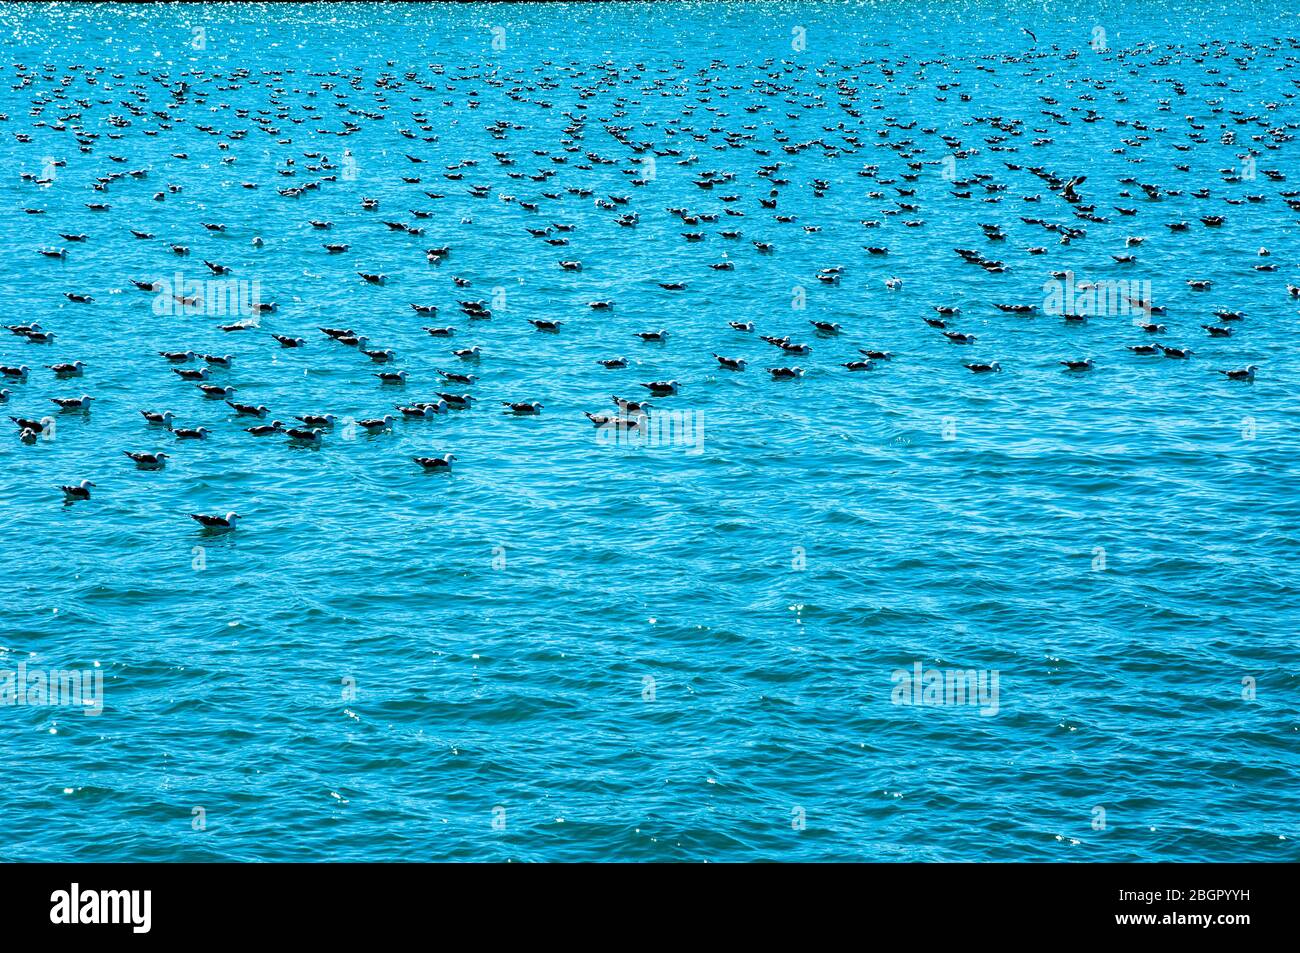 Flock of seagulls in the Port of Malaga Stock Photo